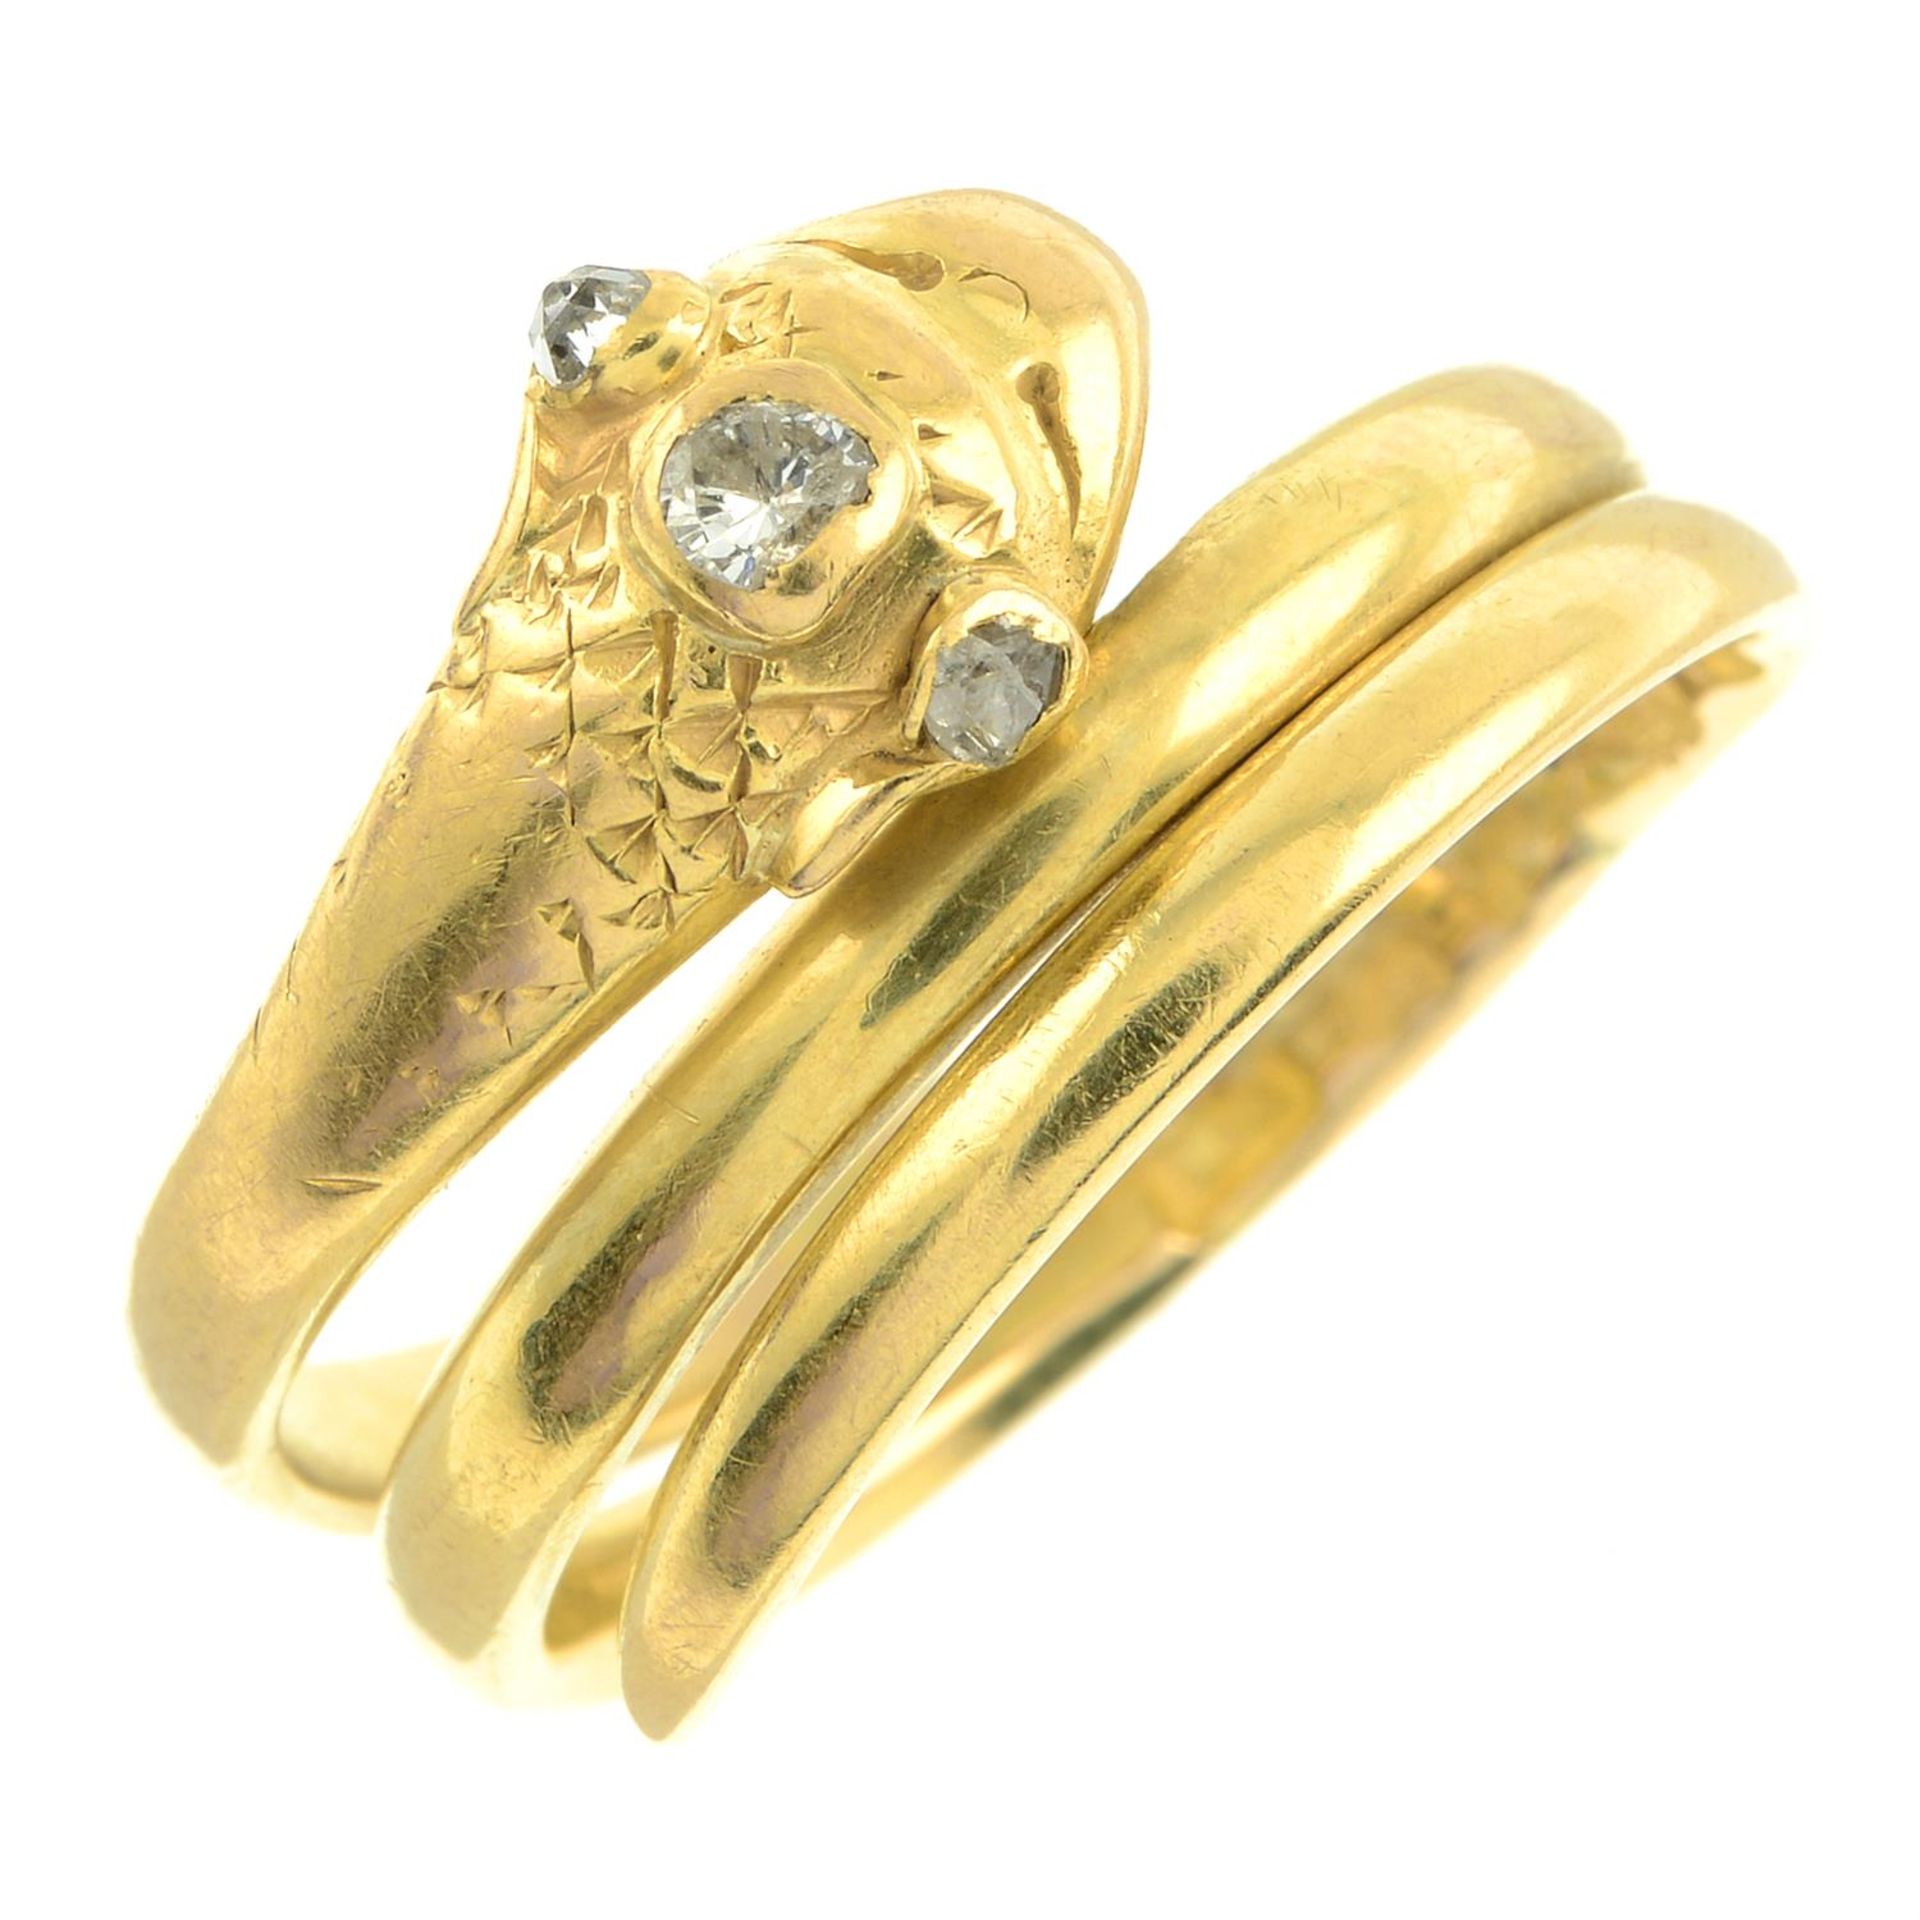 A mid Victorian 18ct gold snake ring, with diamond crest and eyes. - Image 2 of 5